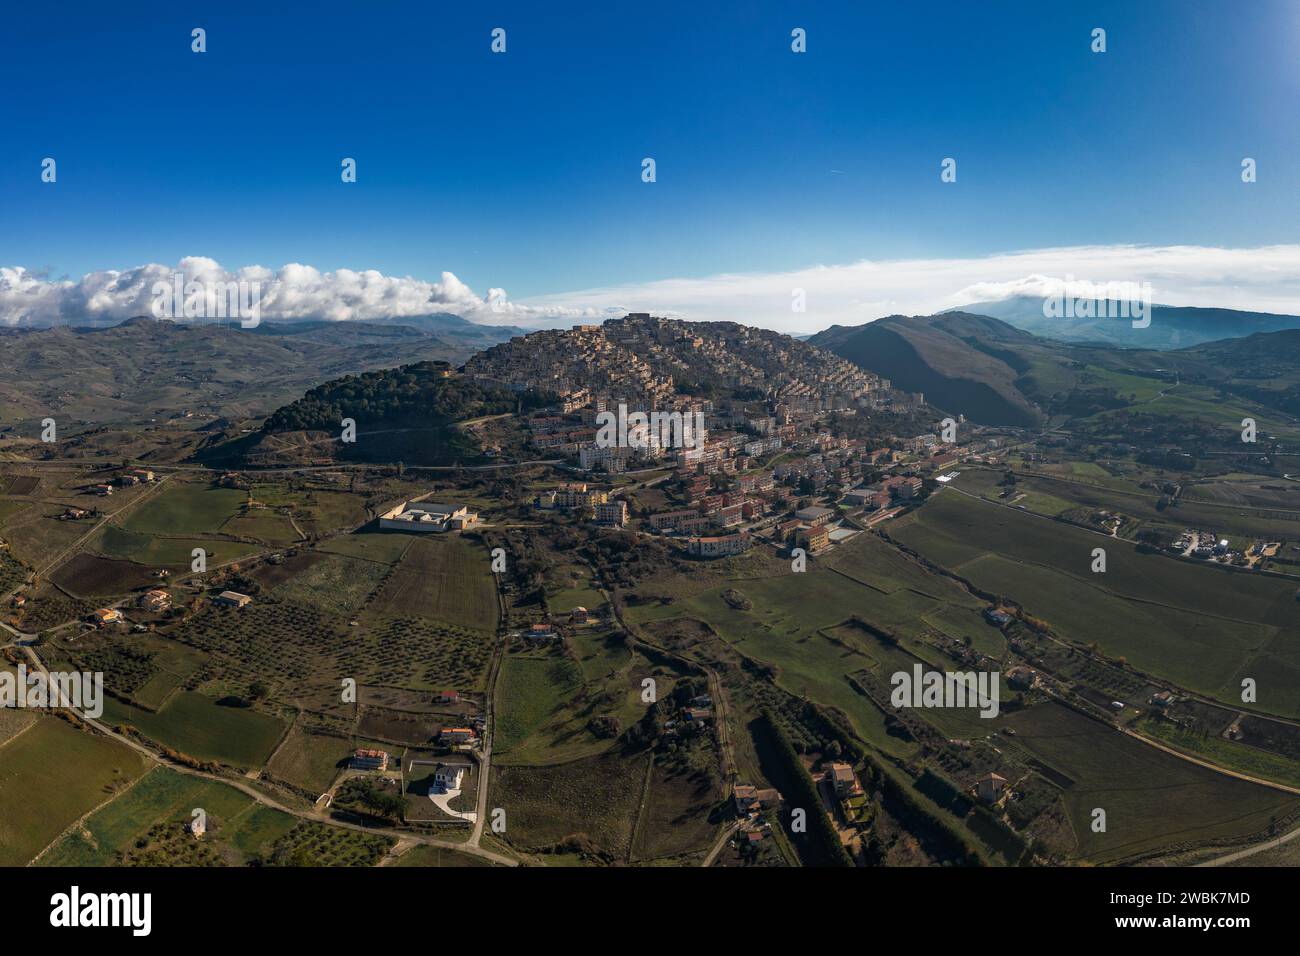 A drone view of the hilltop town of Gangi in central Sicily, Stock Photo